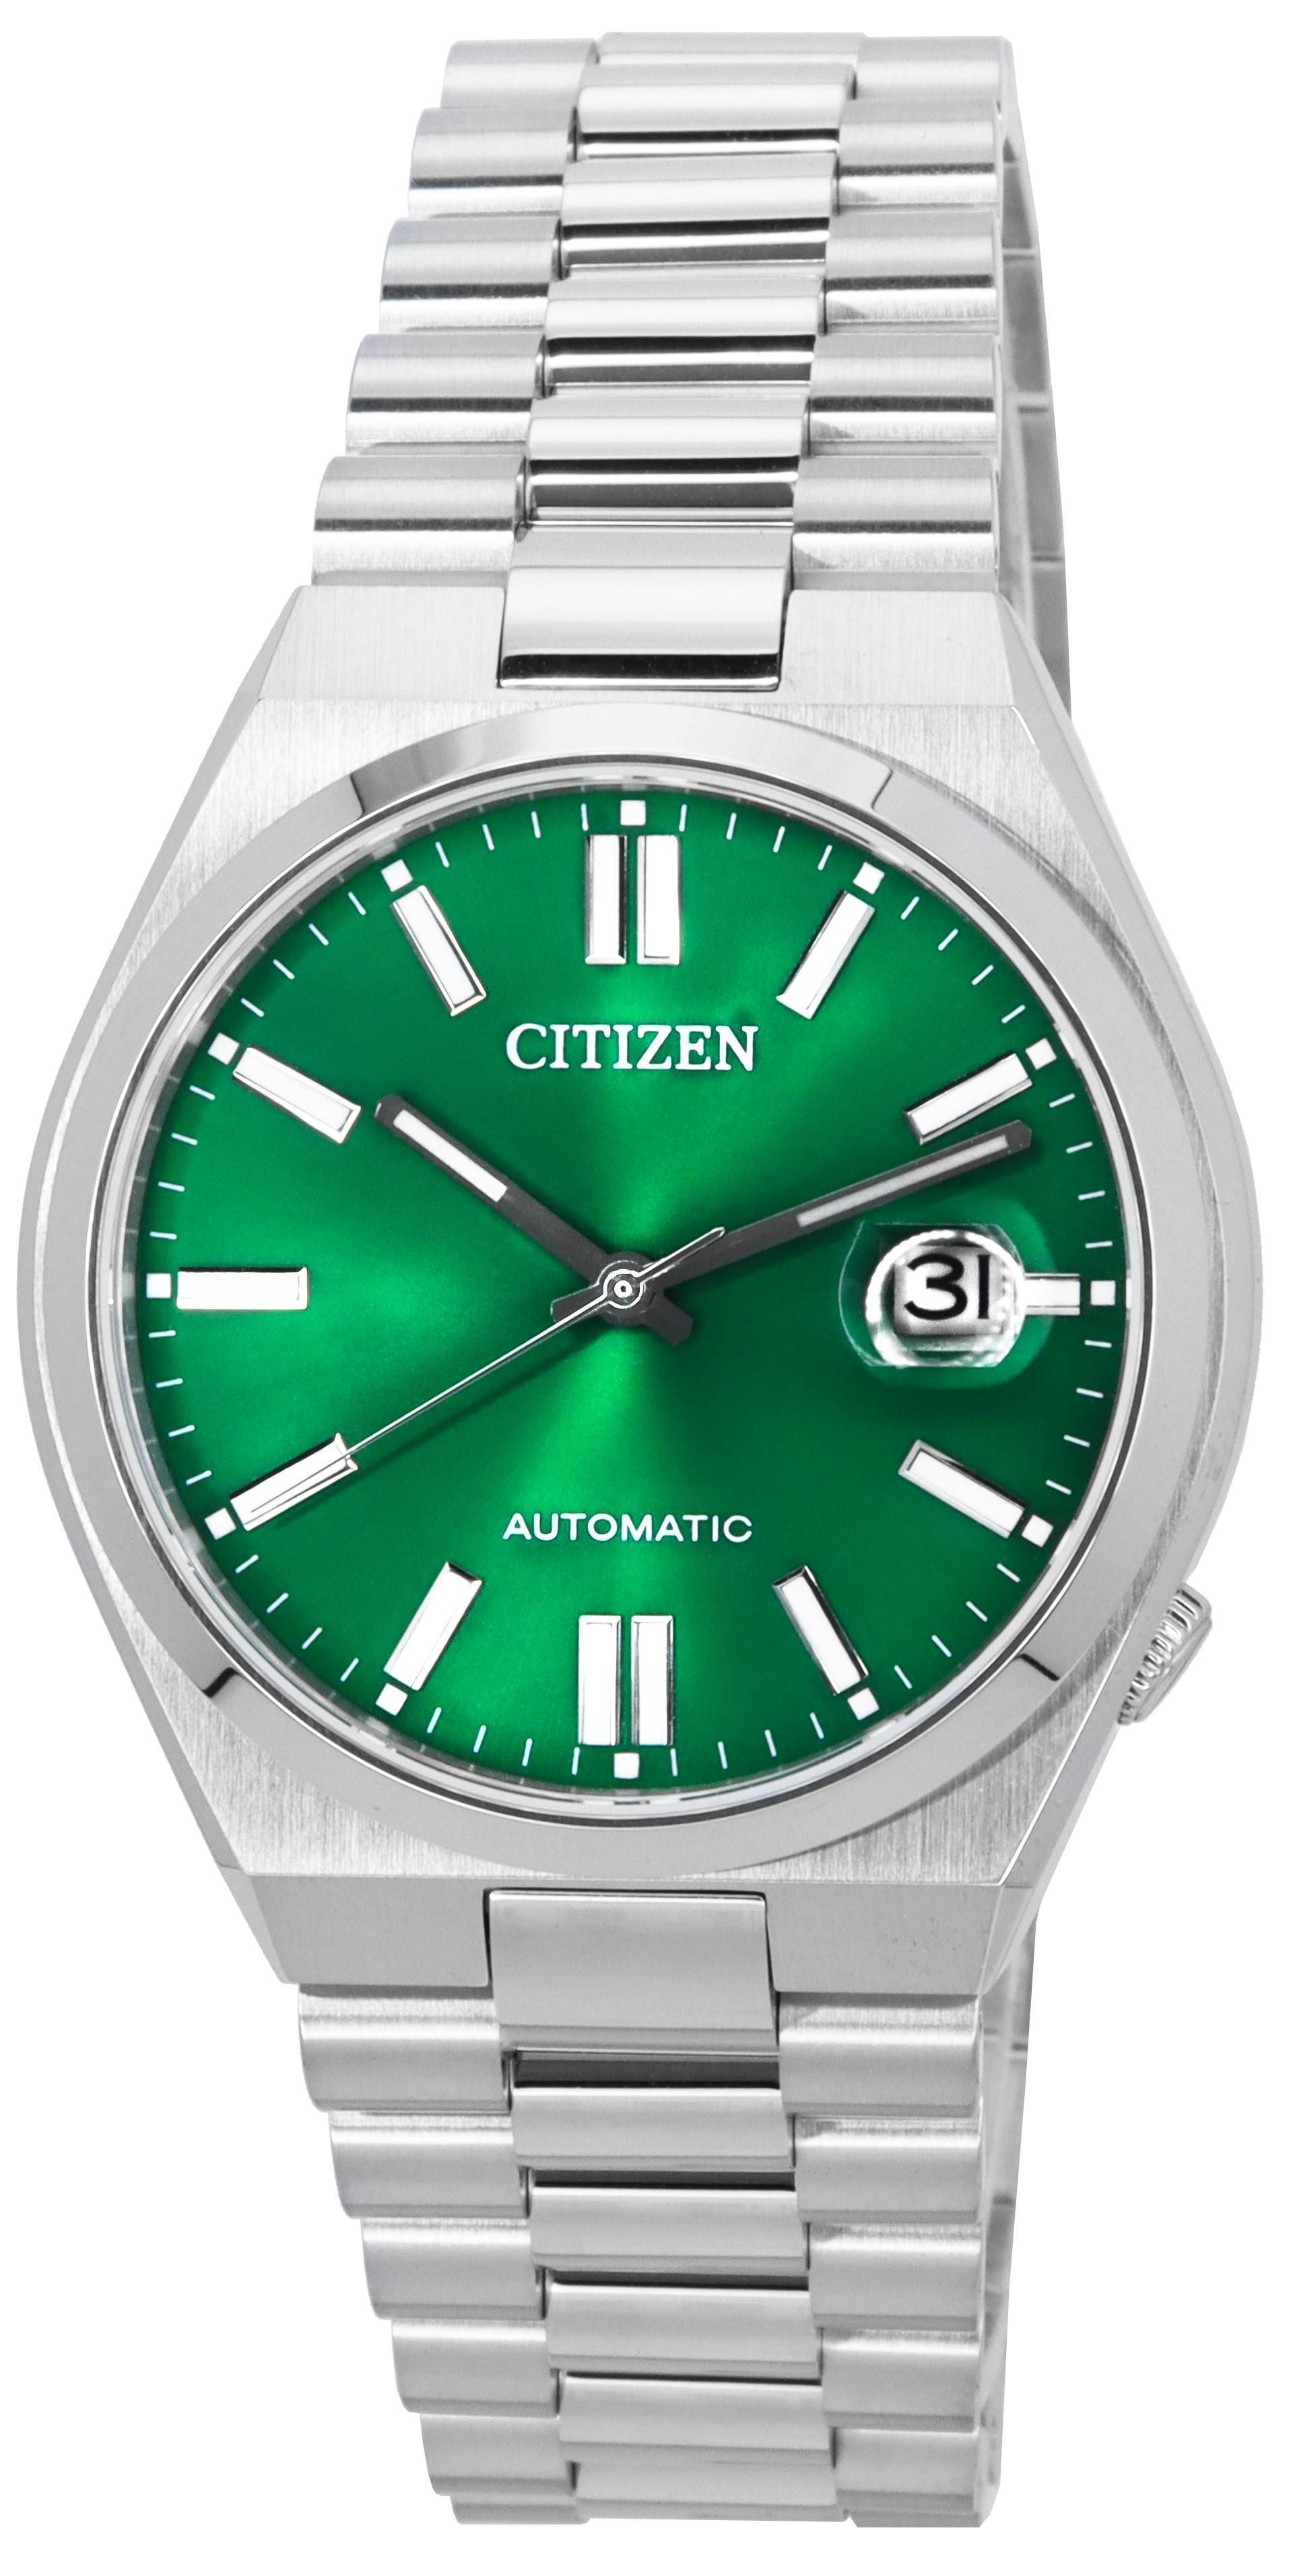 Citizen Tsuyosa Stainless Steel Green Dial Automatic NJ0150-81X Men's Watch